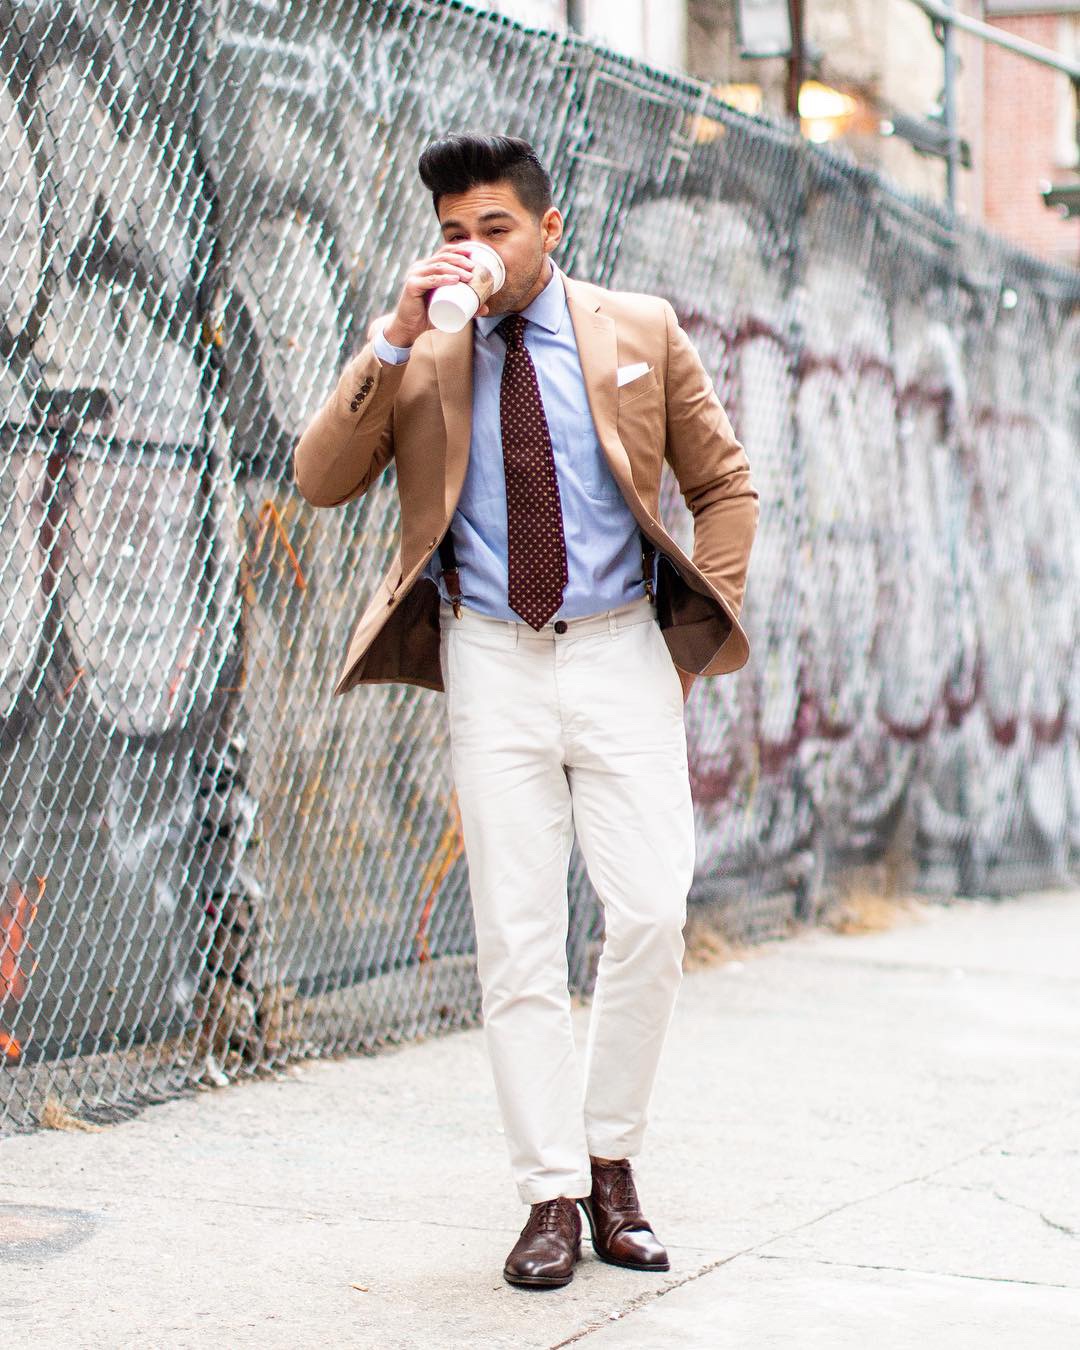 Chinos: How to Wear Them Well - white chinos - basic chinos - casual chinos - how to wear chinos - smart casual chinos - casual chinos - how to style chinos - how to wear chinos - smart casual chinos - dandy in the bronx - white chinos - classy chinos - dapper chinos - chinos suit - chinos and blazer